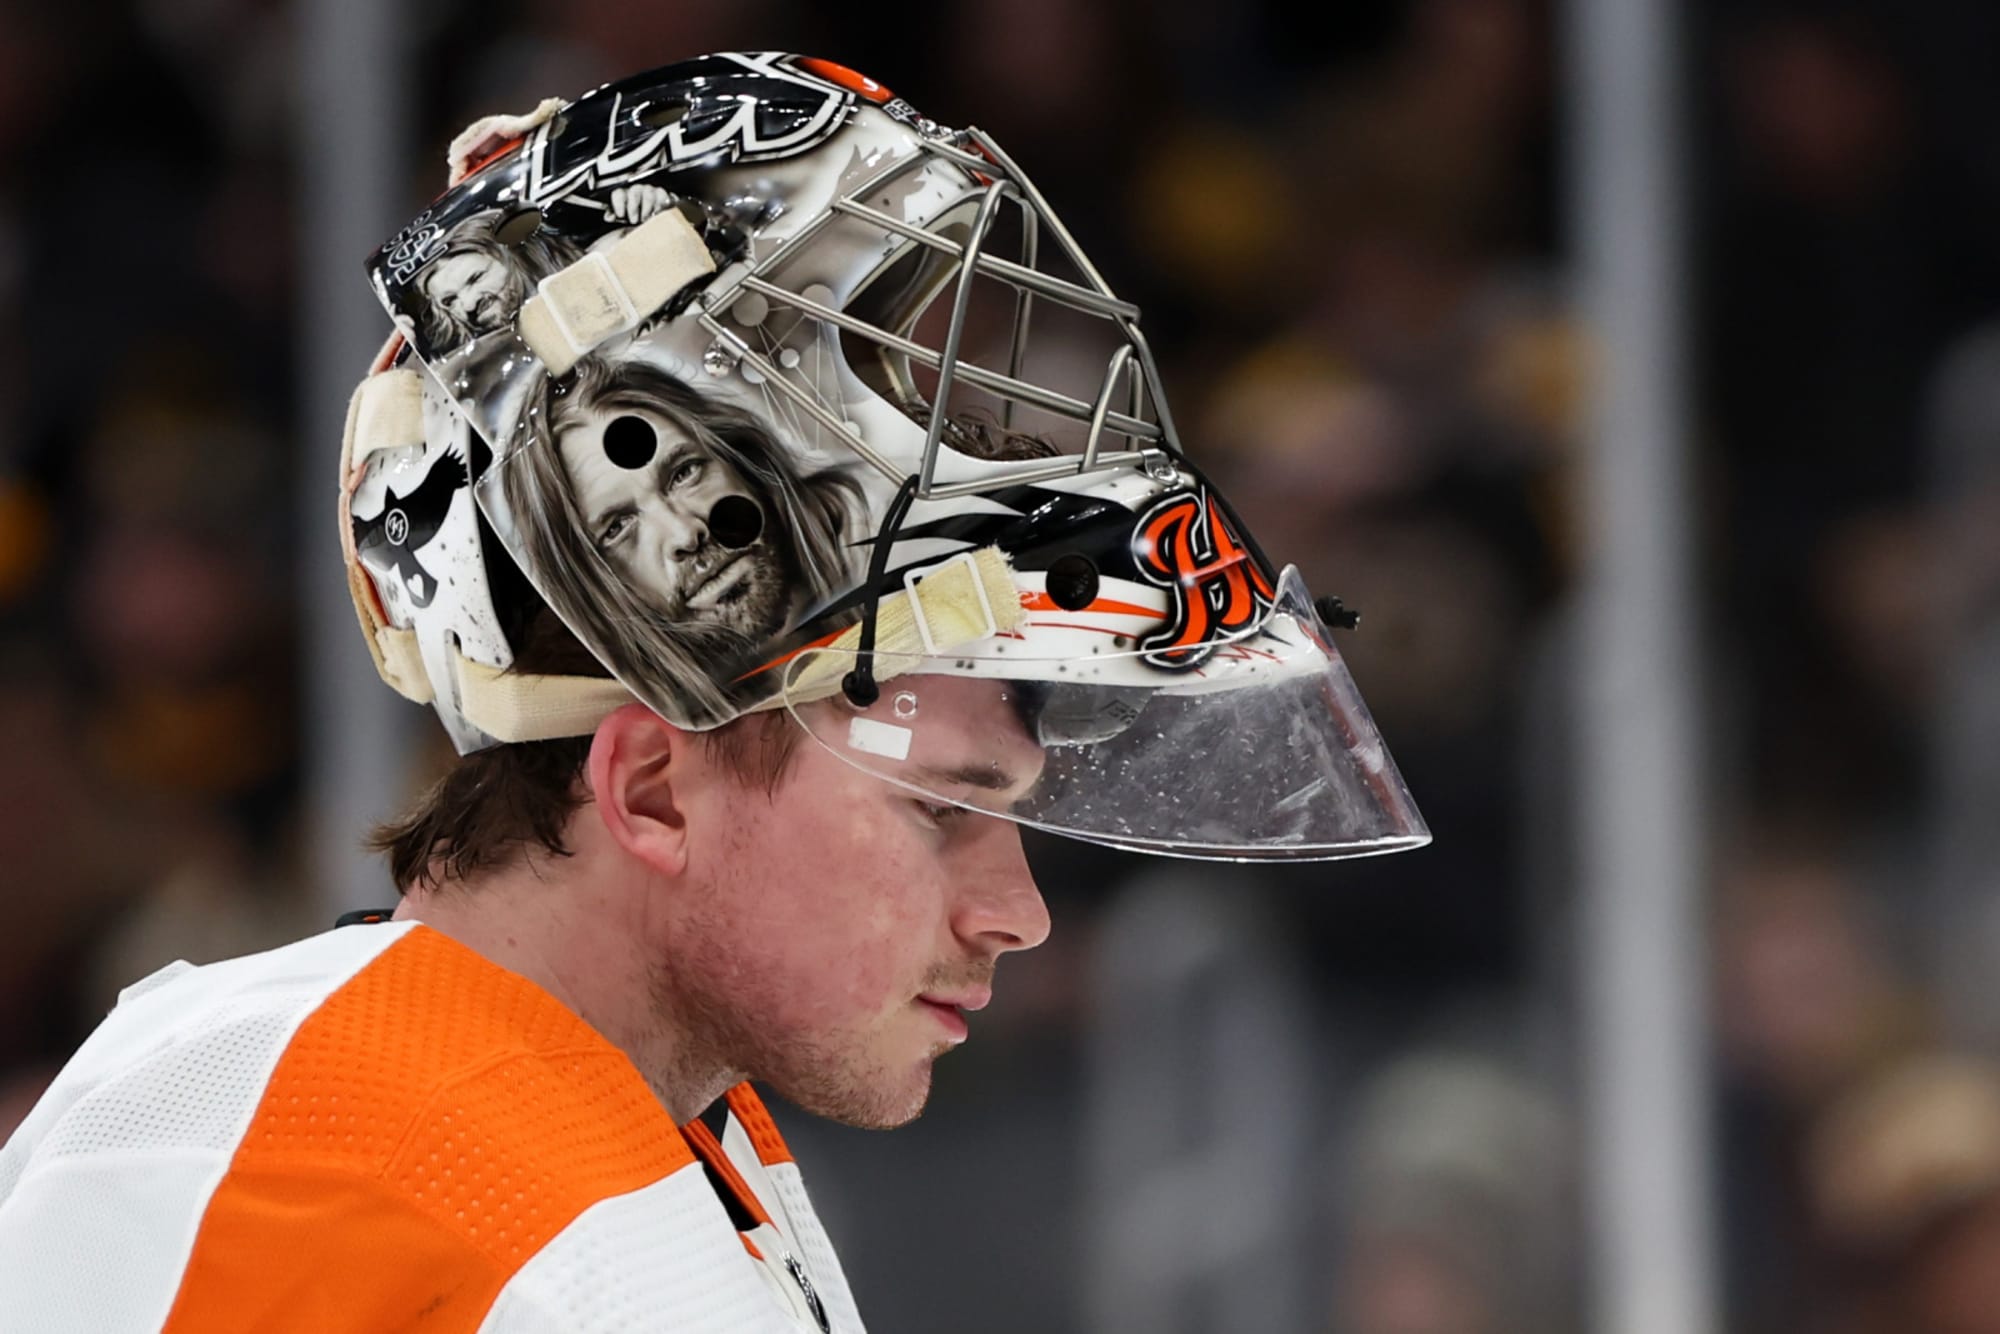 Flyers' Carter Hart hid injury that will sideline him for at least 7-10 days